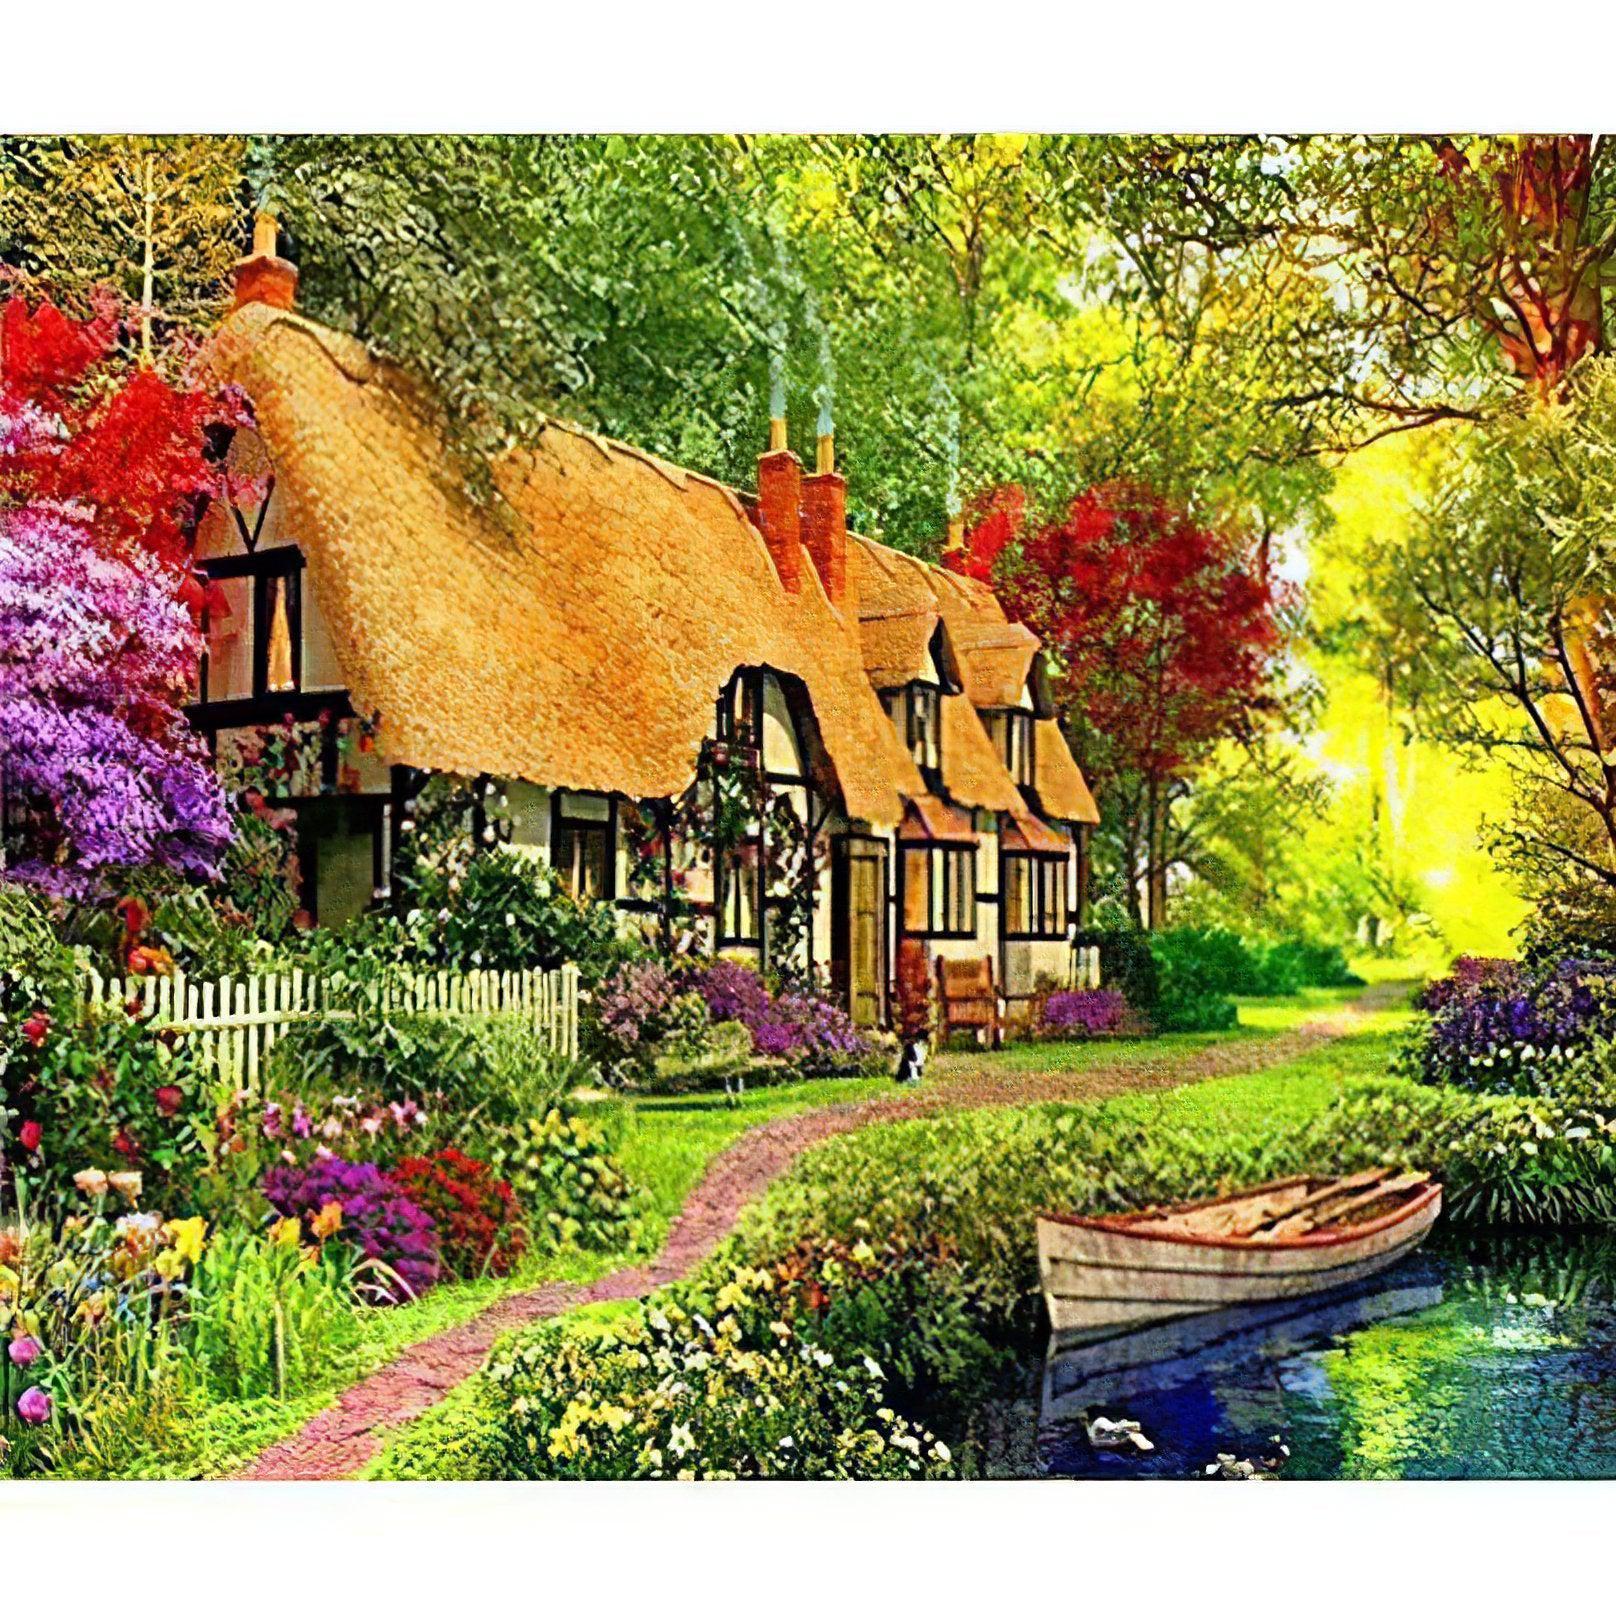 Escape to tranquility with the Magnificent Rural House scene.Magnificent Rural House - Diamondartlove